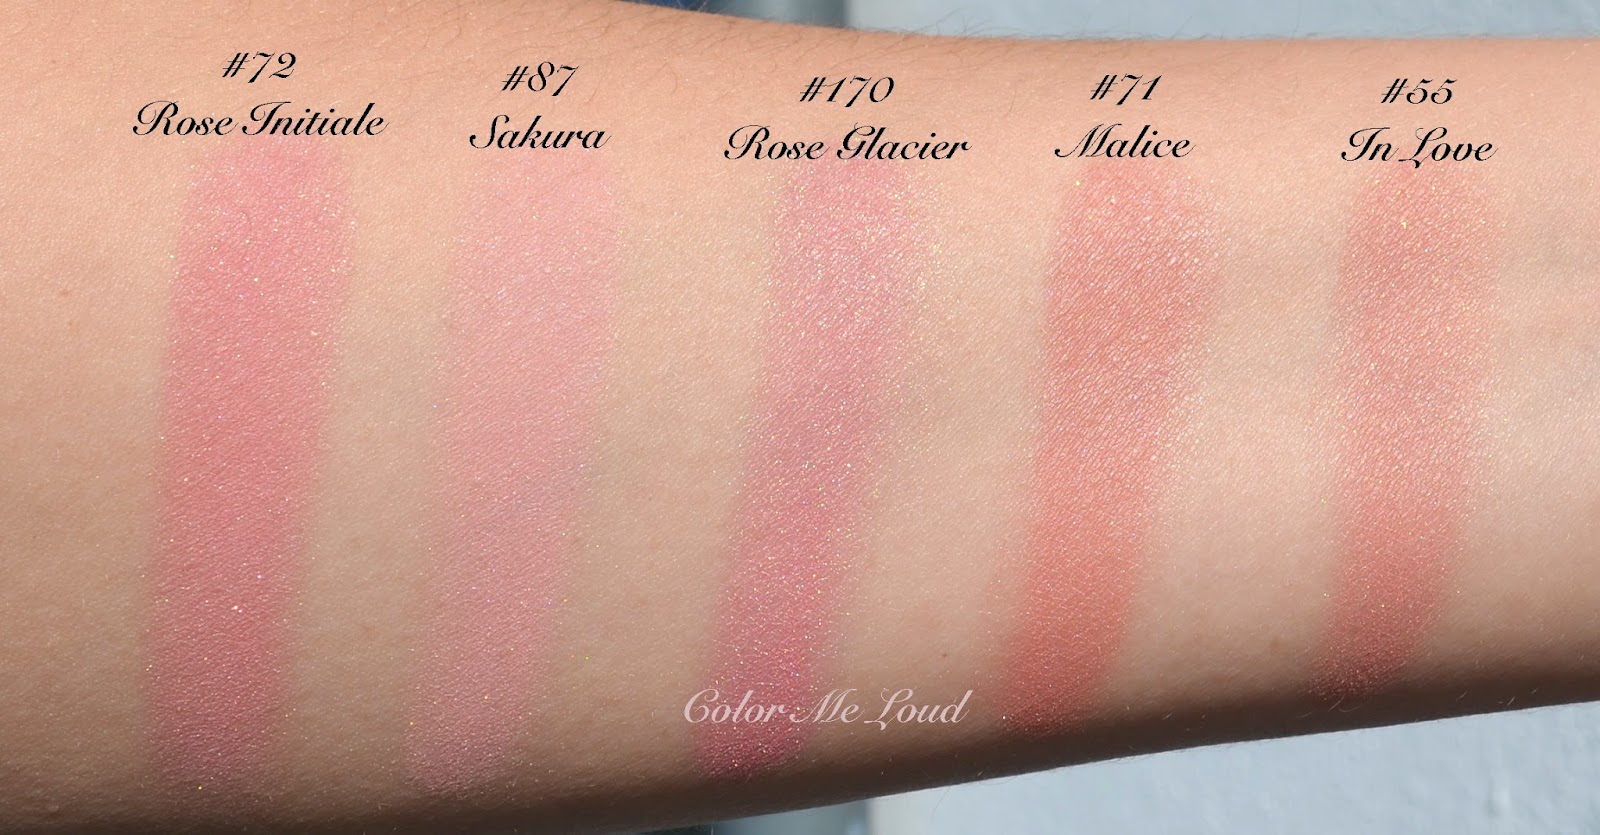 Chanel Frivole Joues Contraste Powder Blush Swatches & Review - Spring 2013  - Blushing Noir